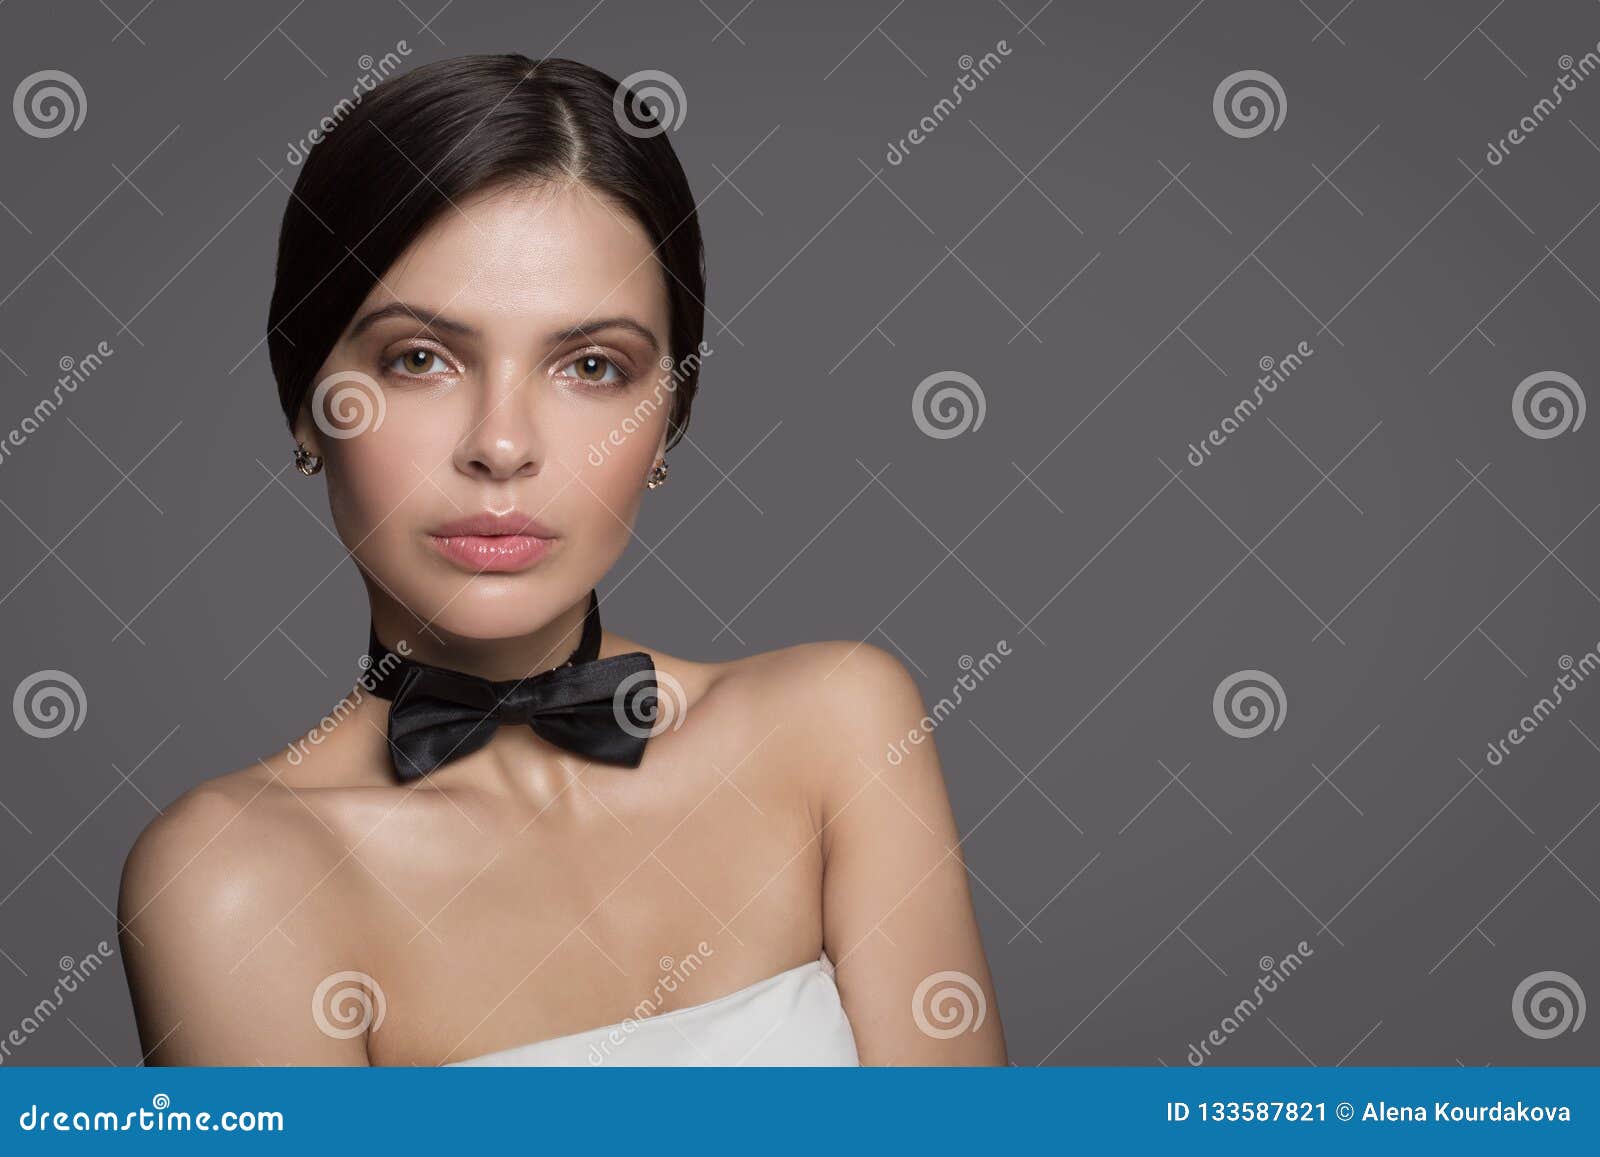 Tender Young Woman With Naked Shoulders Stock Photo 